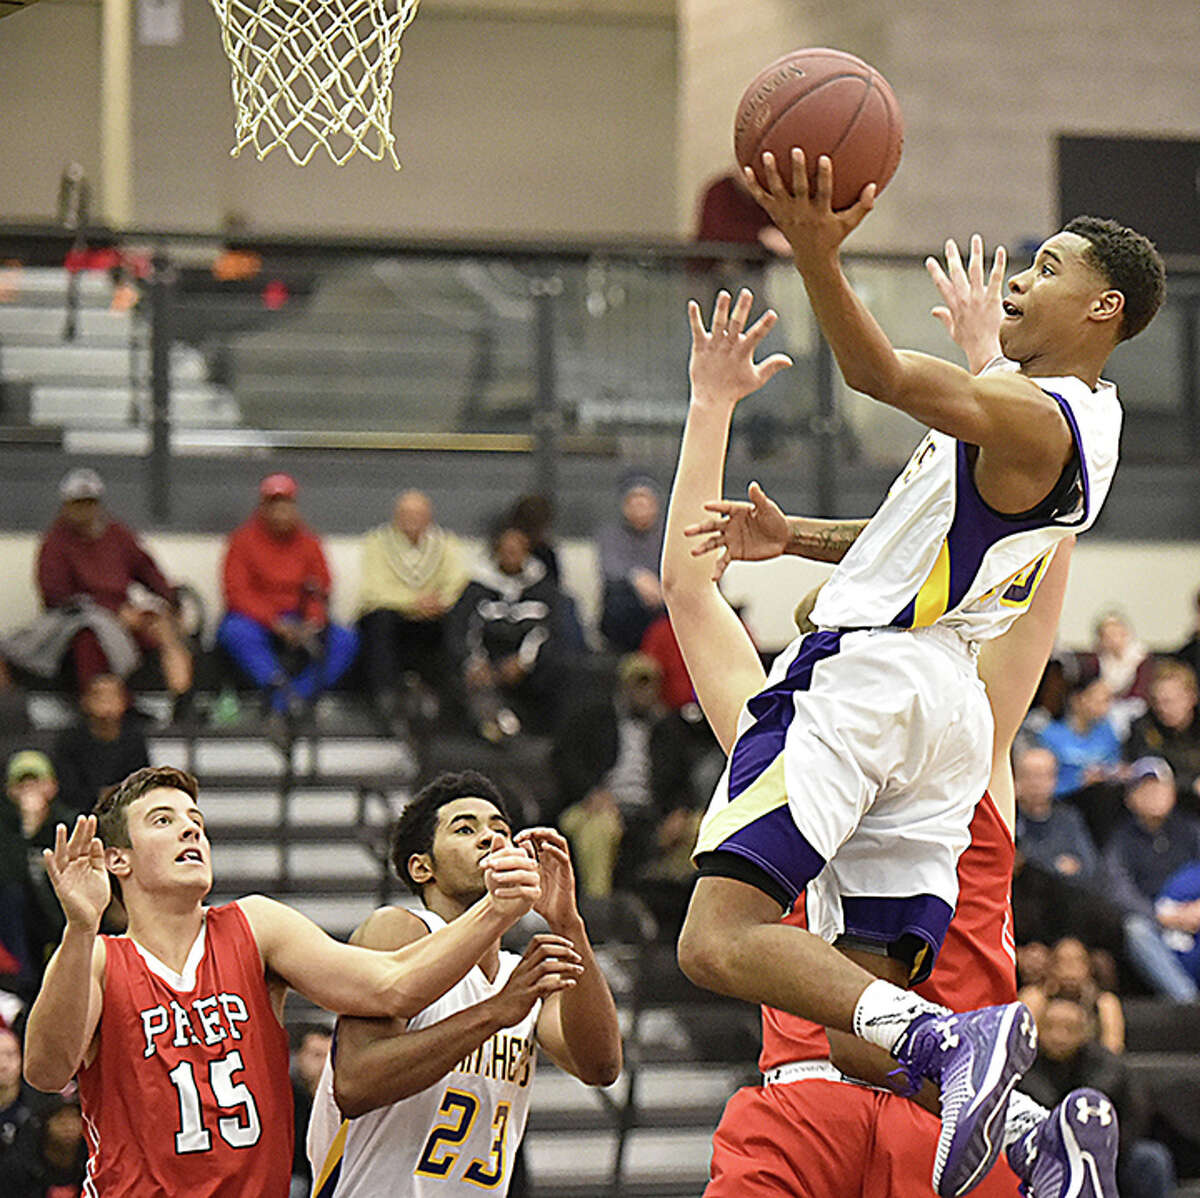 Career’s Tyreek Perkins elevates for a shot as Fairfield Prep’s Patrick Harding (25) defends during the regular season. Perkins is the 2014-15 Area MVP for the New Haven Register. (Catherine Avalone/New Haven Register)